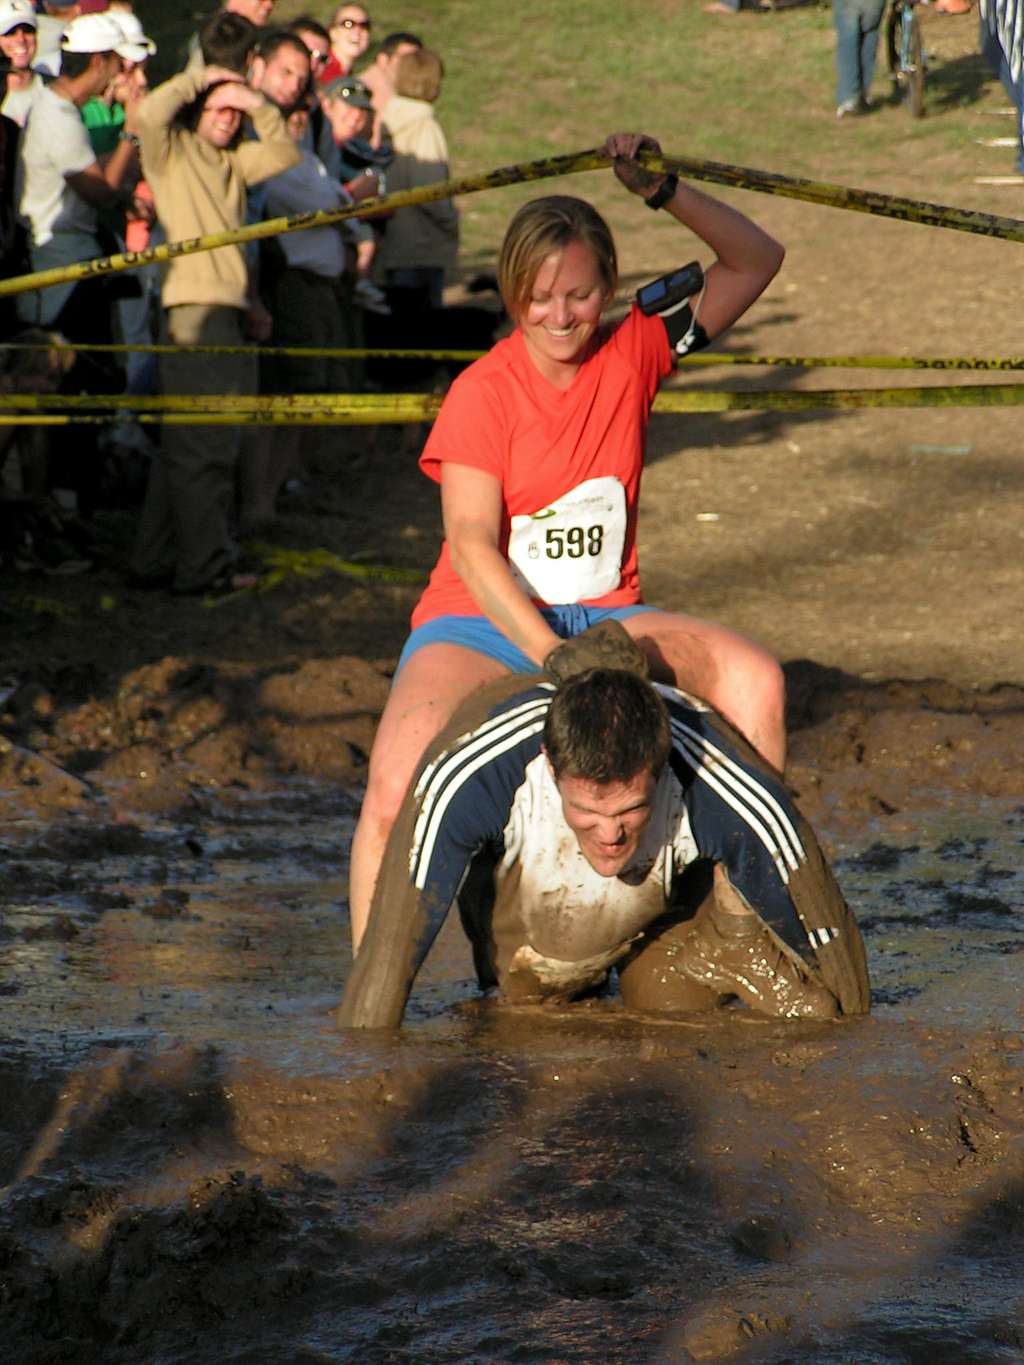 A woman avoids the mud the old fashion way. Vail, CO